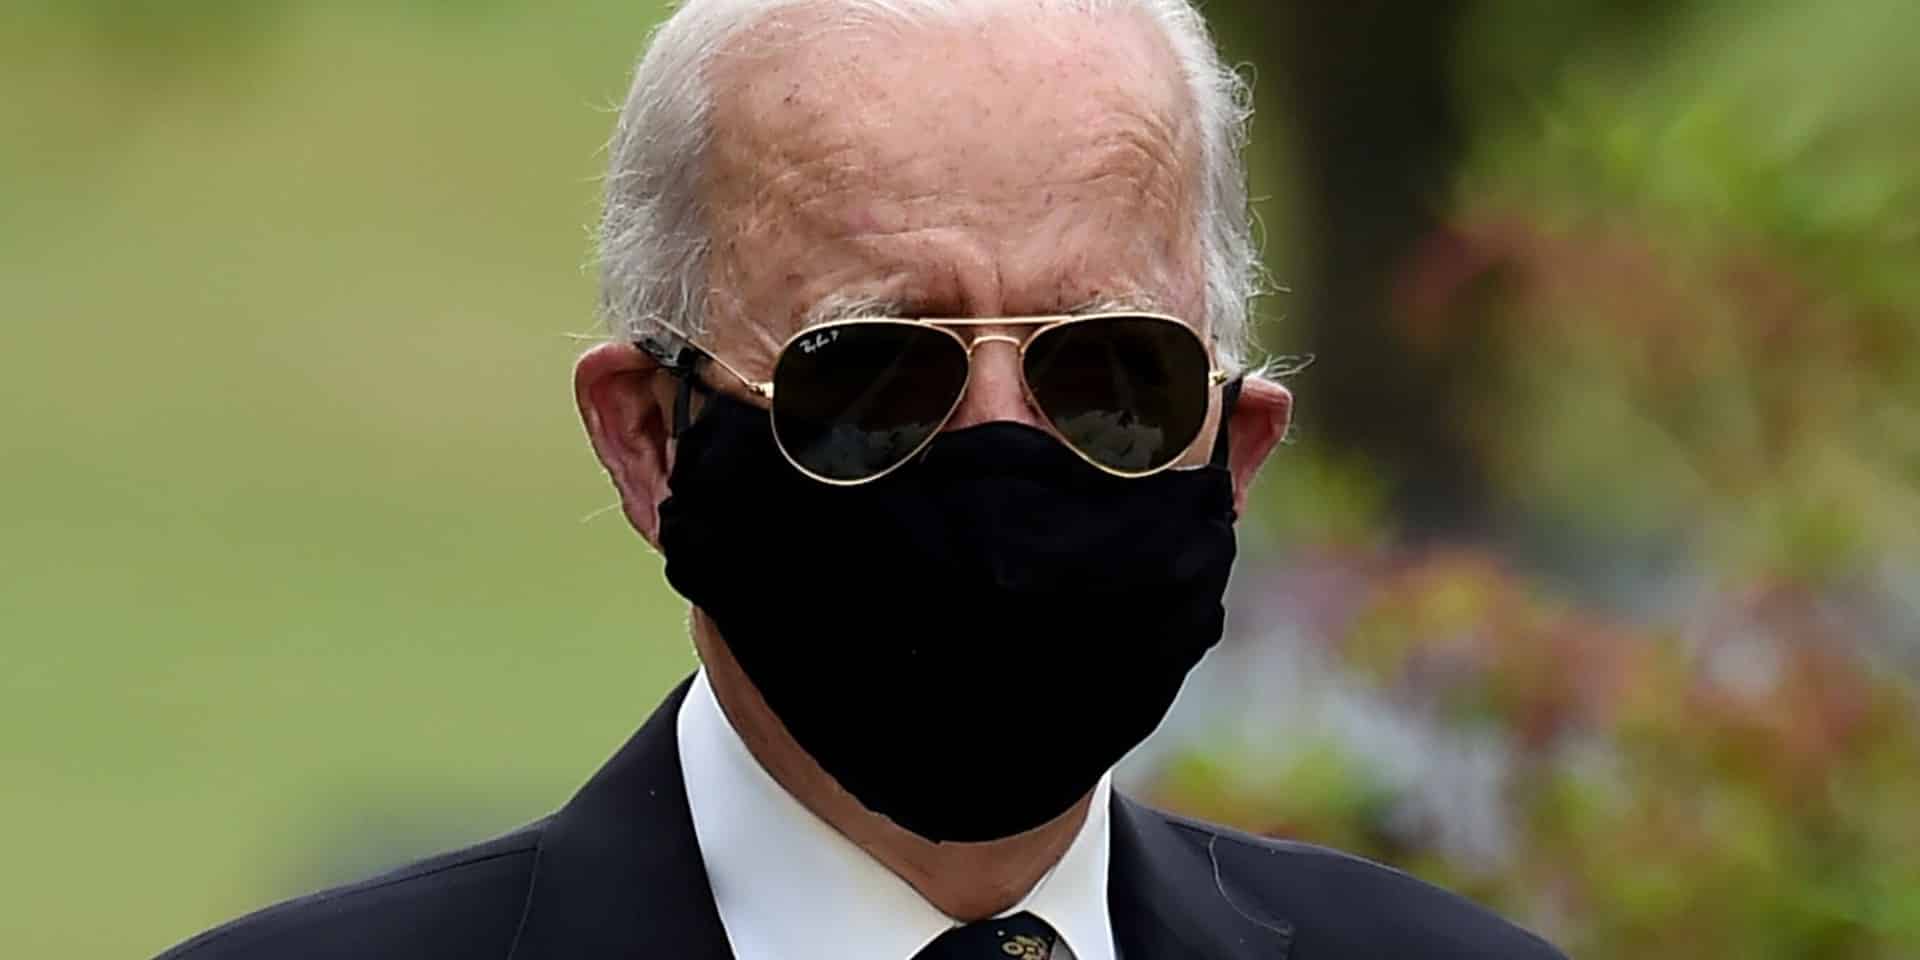 The Worst Junk Mail: The Biden Administration Wants to Deliver Masks to All Americans